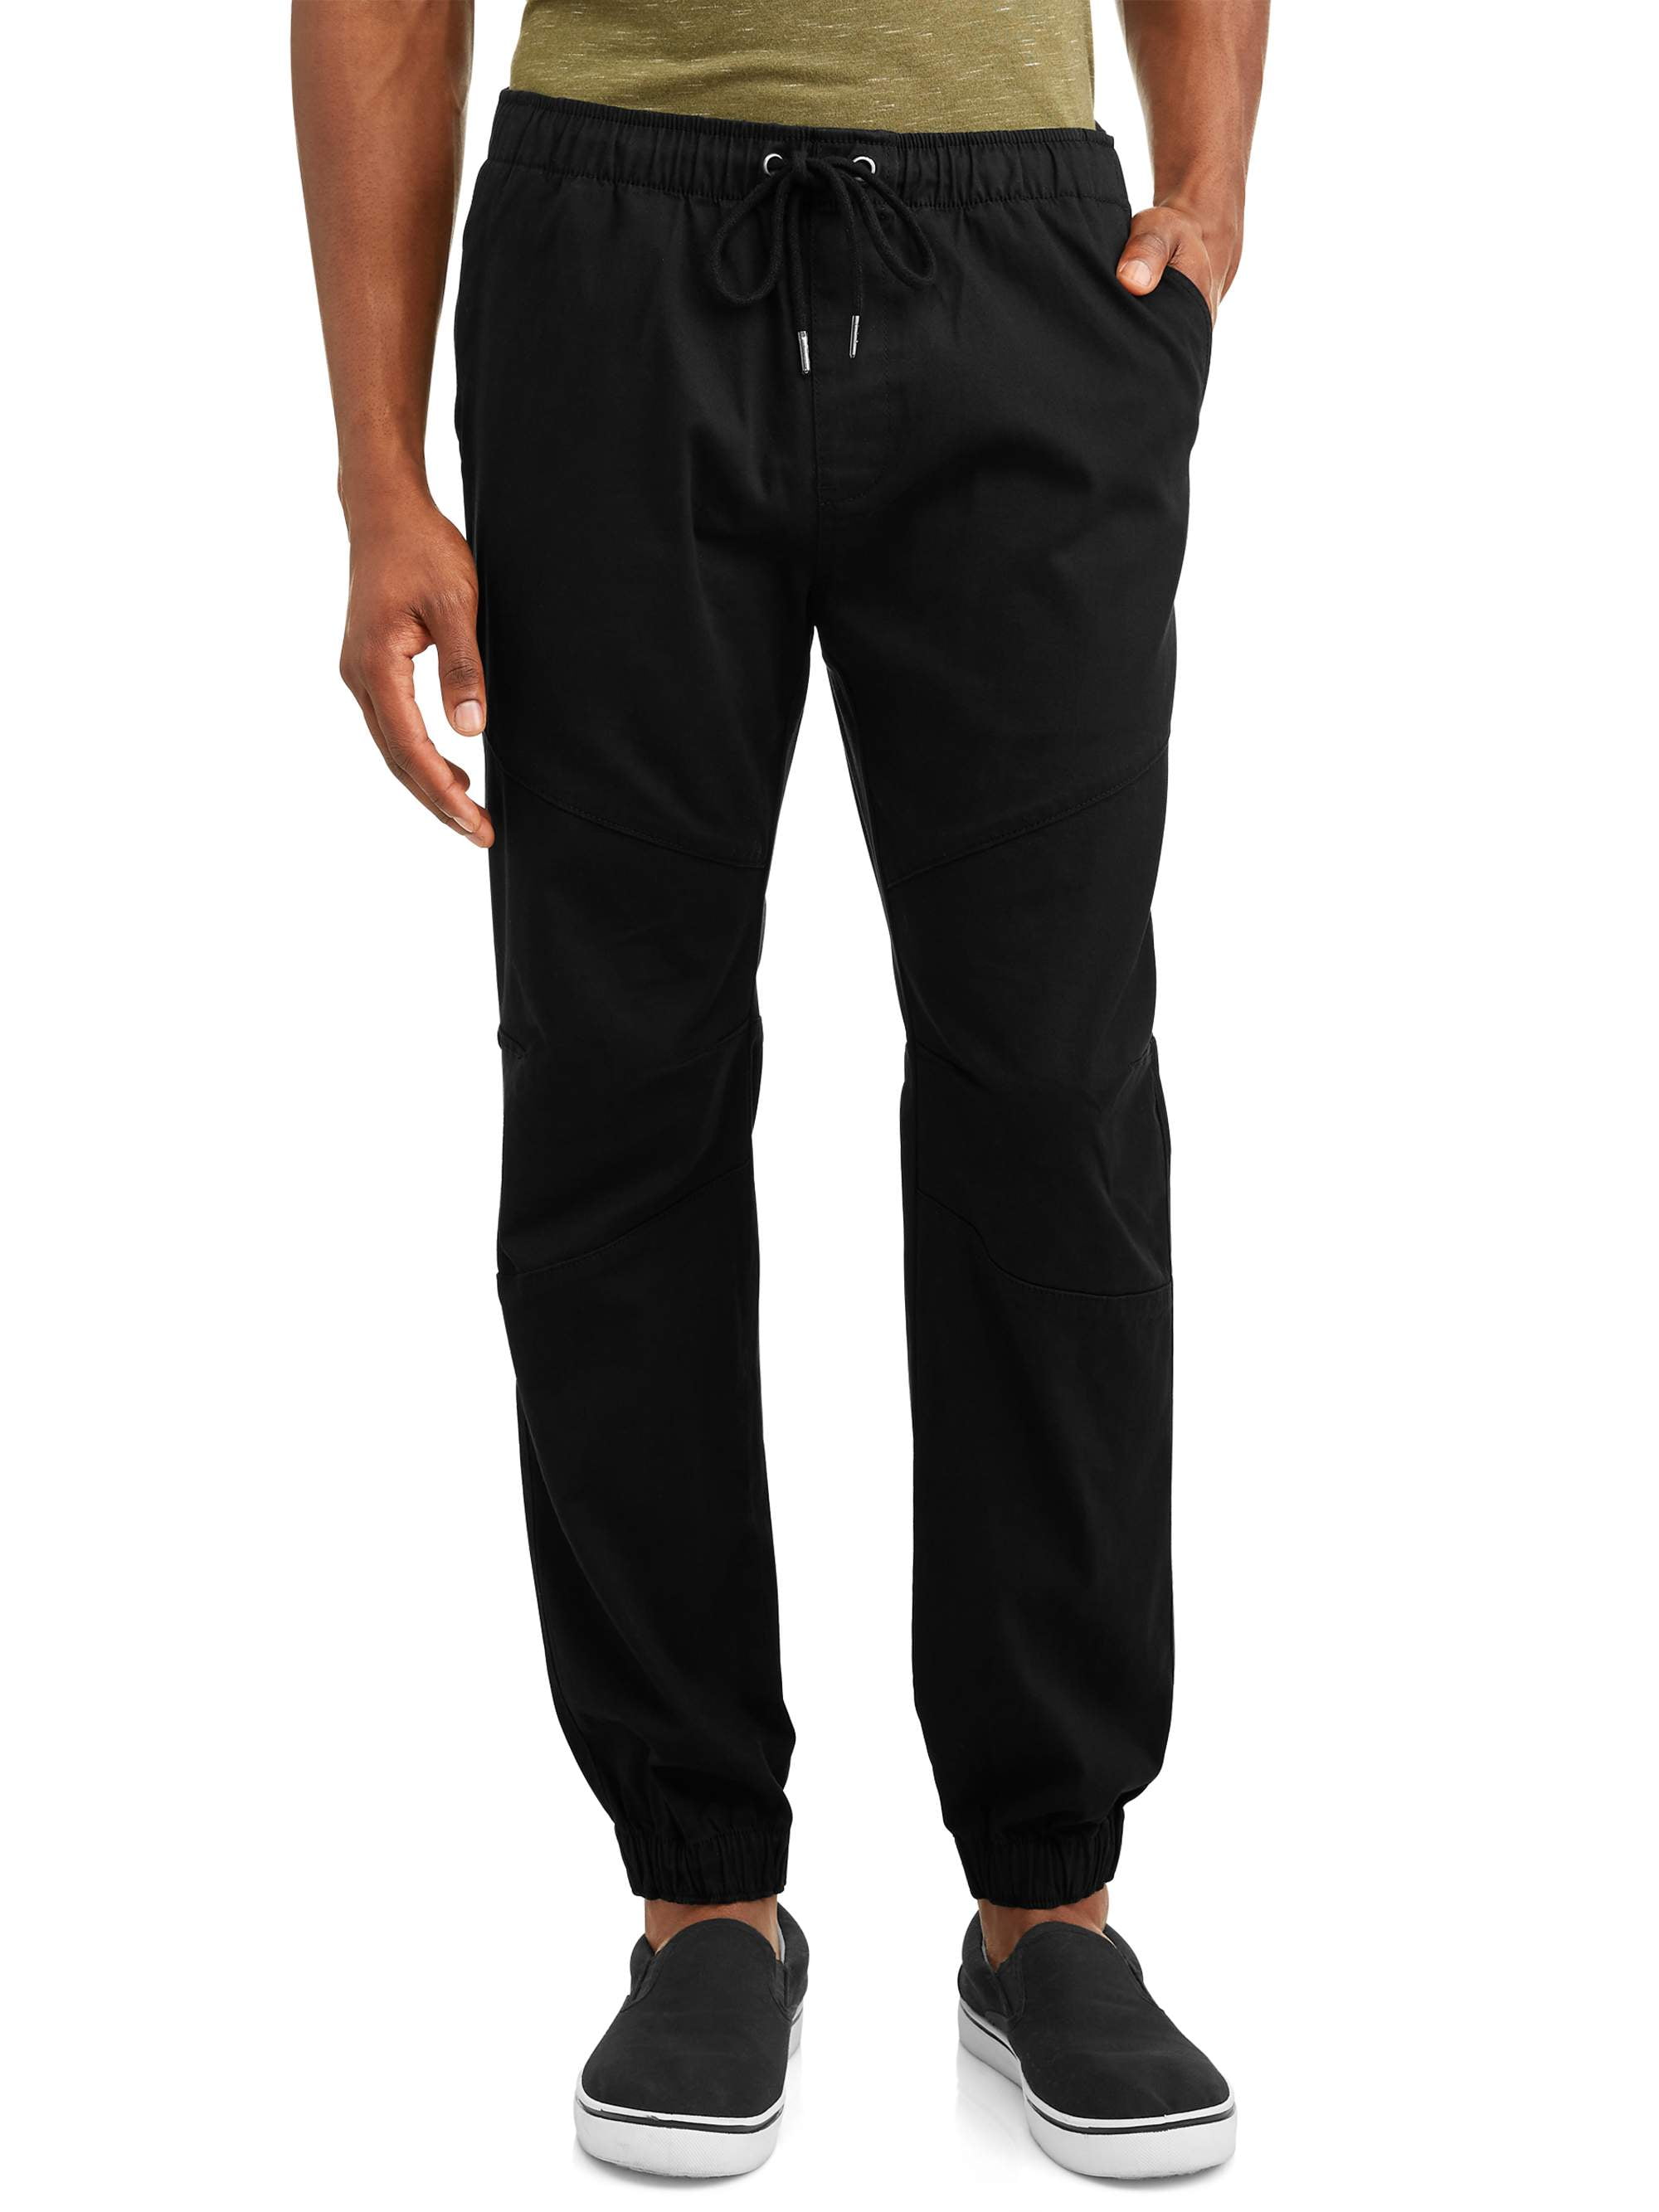 Shop Lazer Men's Stretch Twill Pull On Jogger - Great Prices Await ...